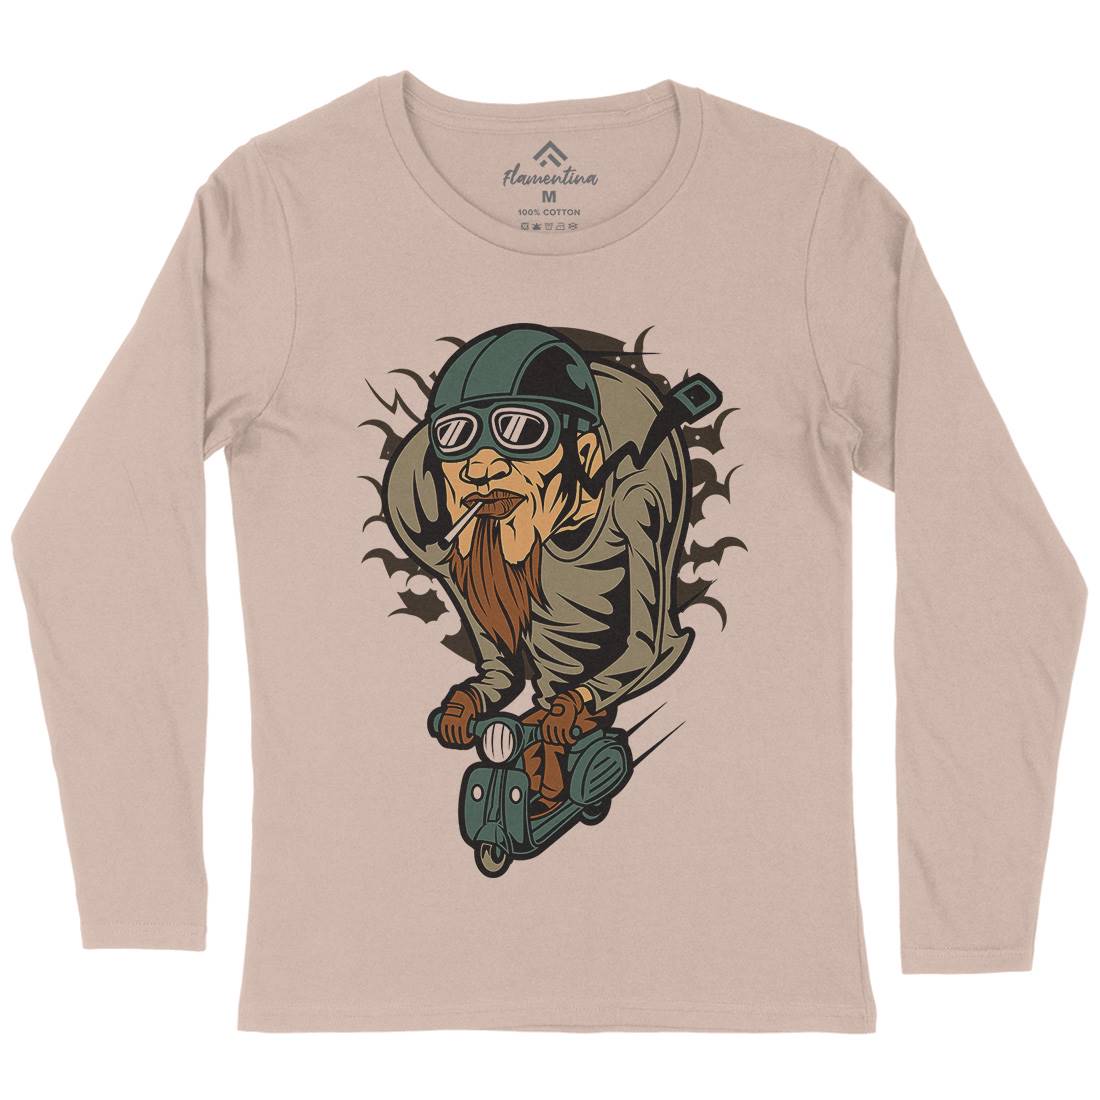 Scooter Man Womens Long Sleeve T-Shirt Motorcycles C437